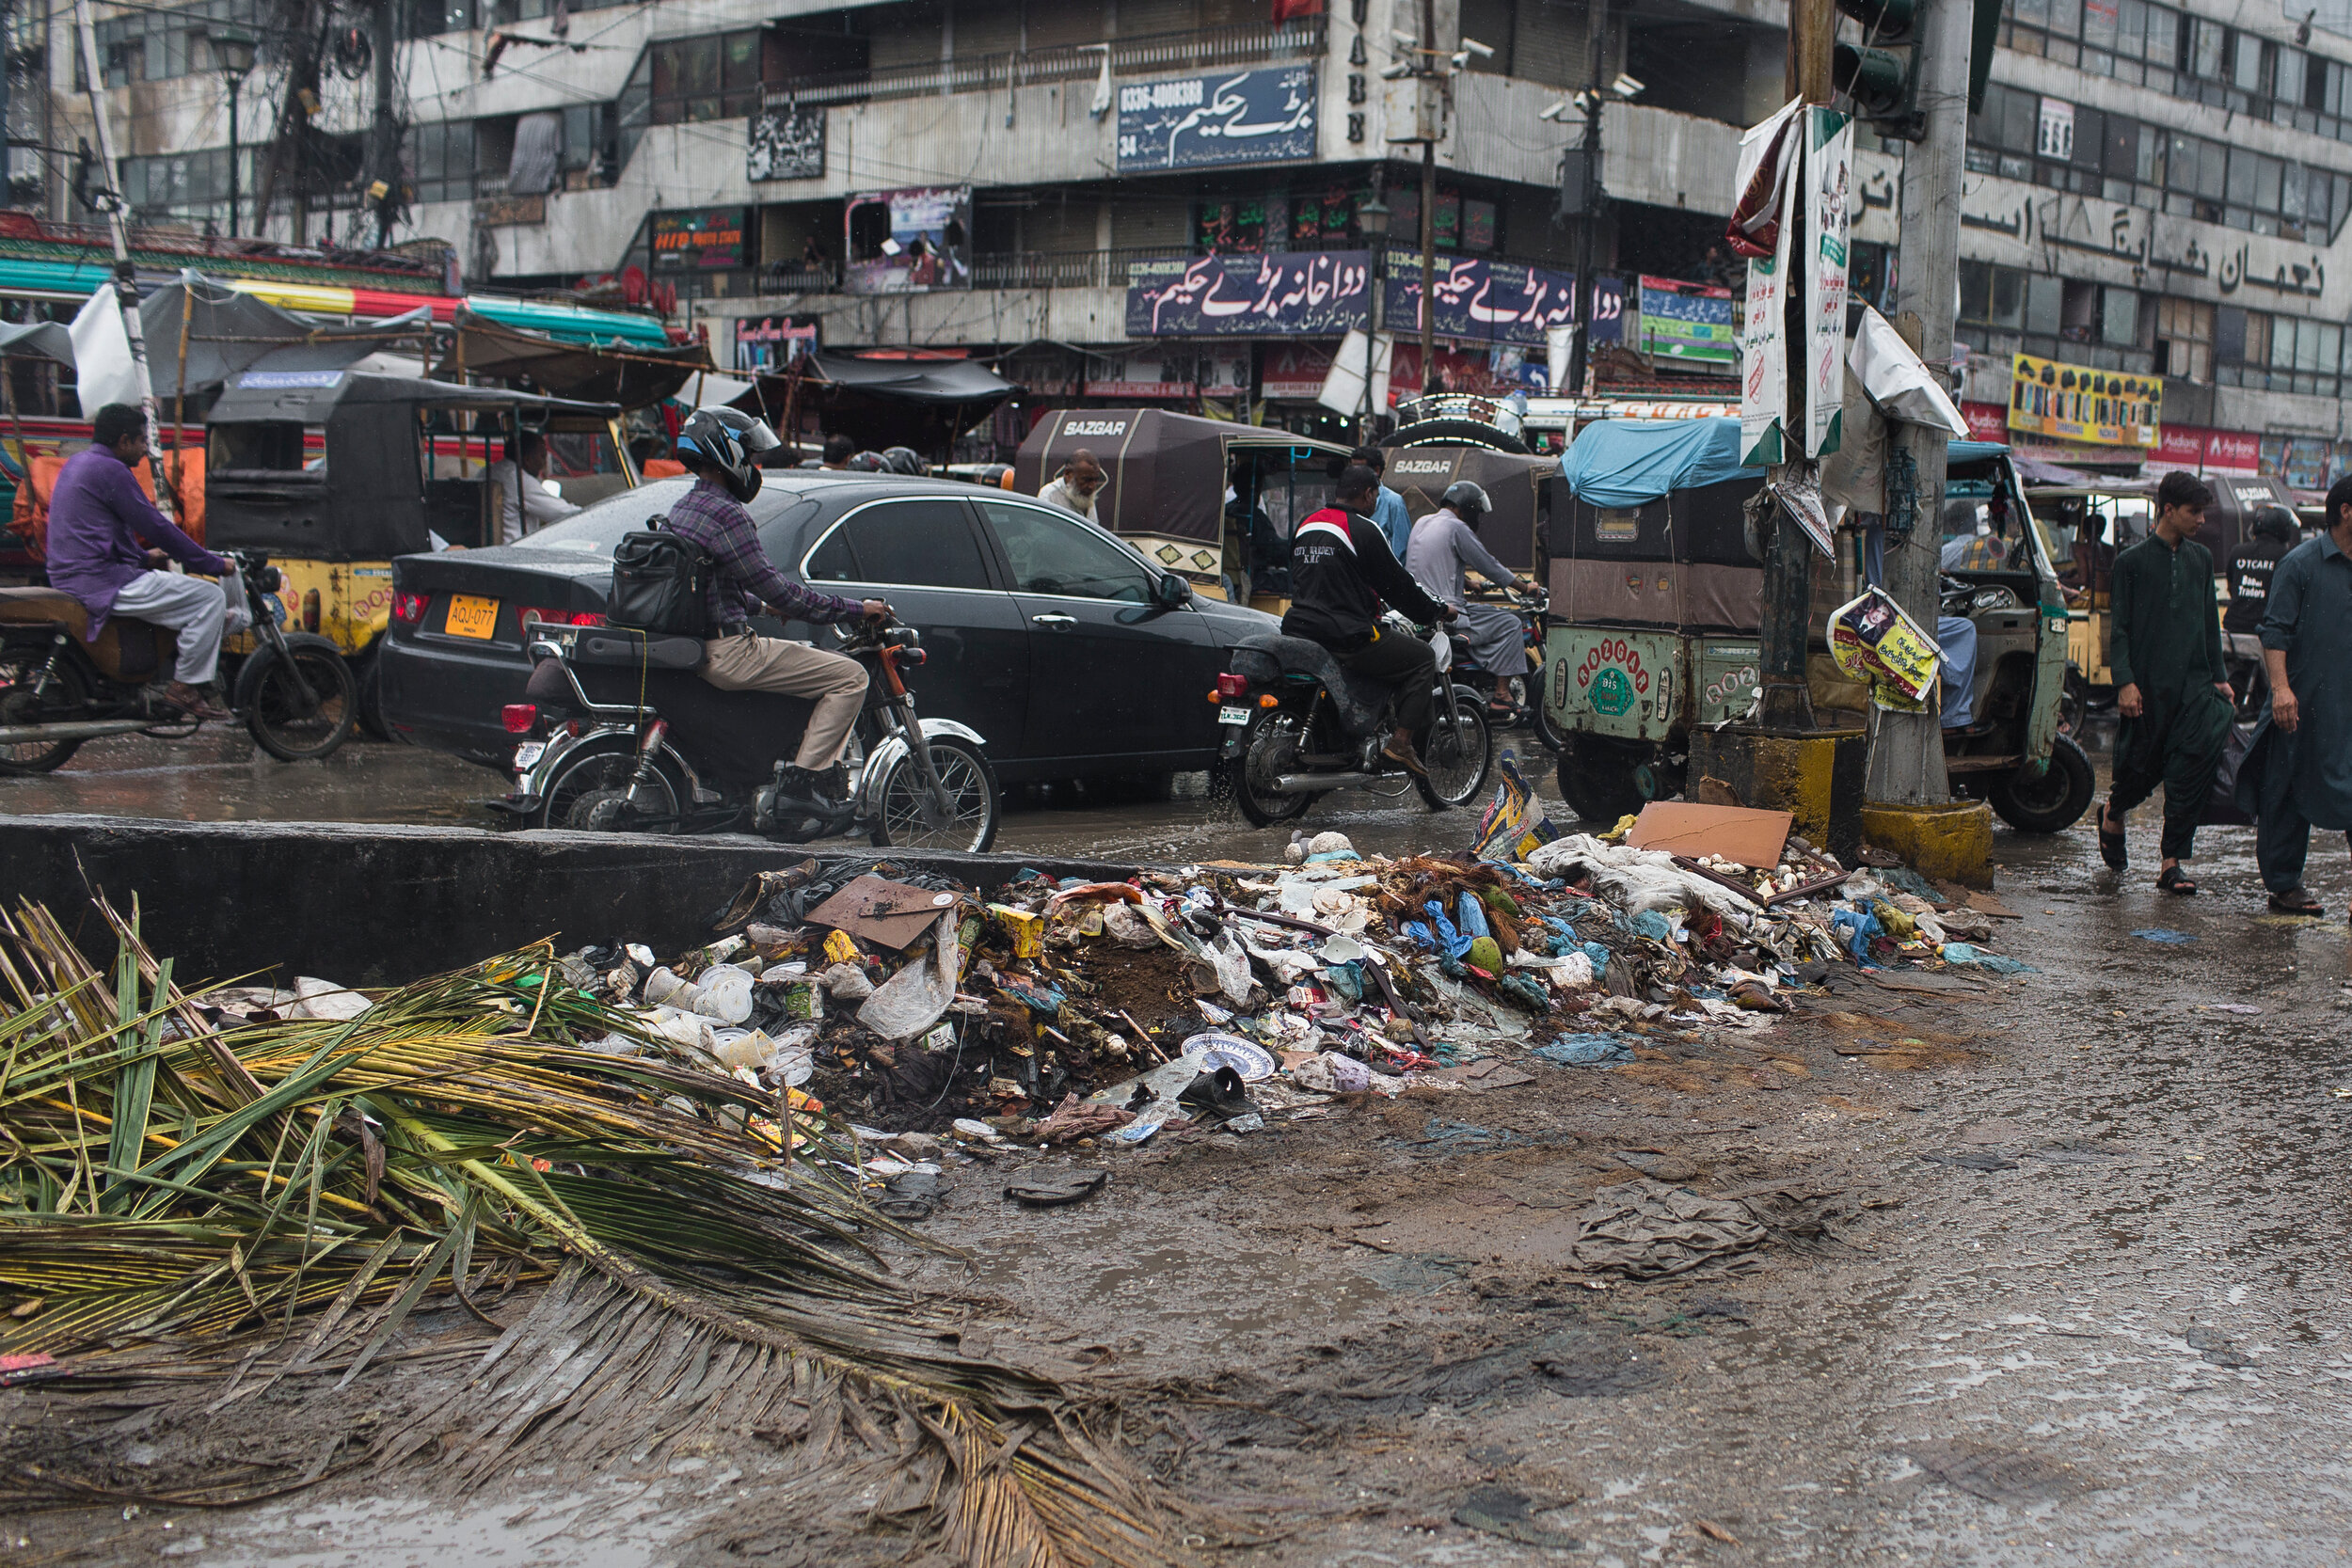  Trash and sewage plagues the city streets.  